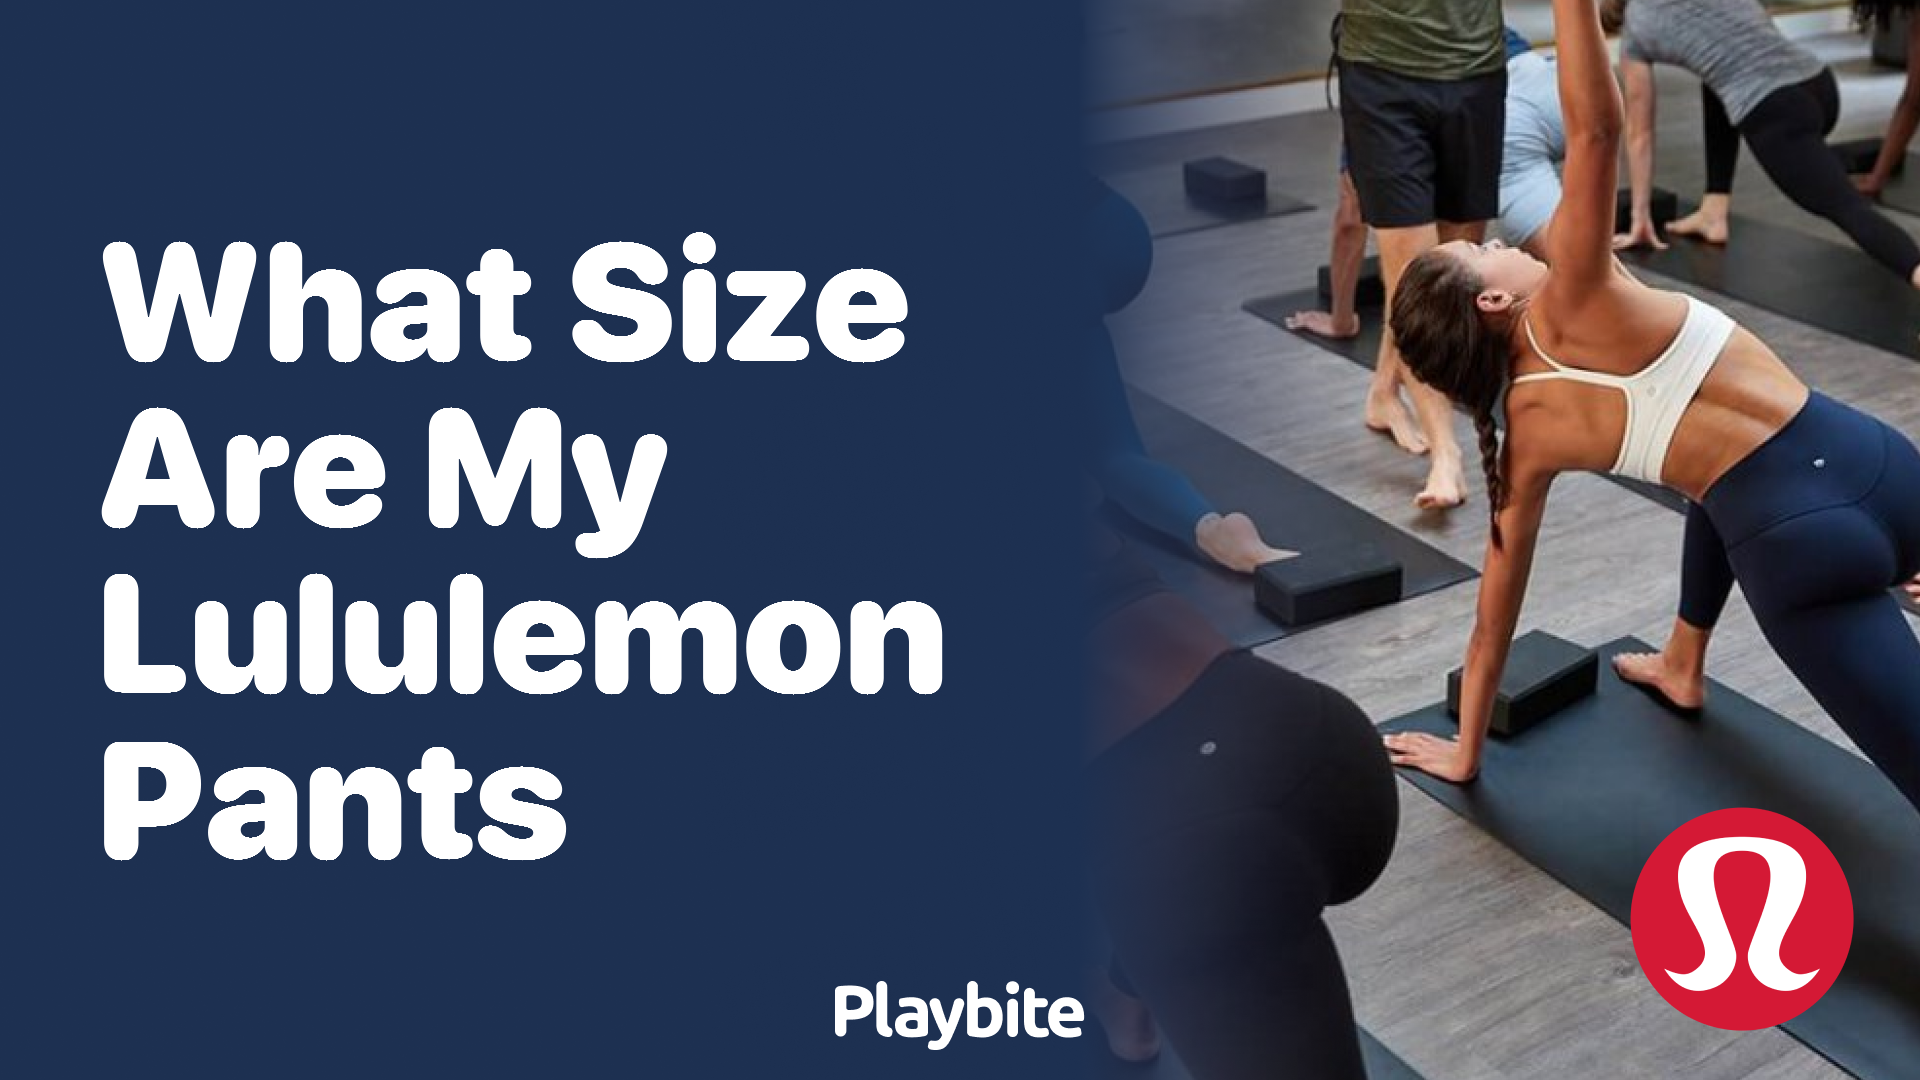 What Size Are My Lululemon Pants? Find Out Here! - Playbite